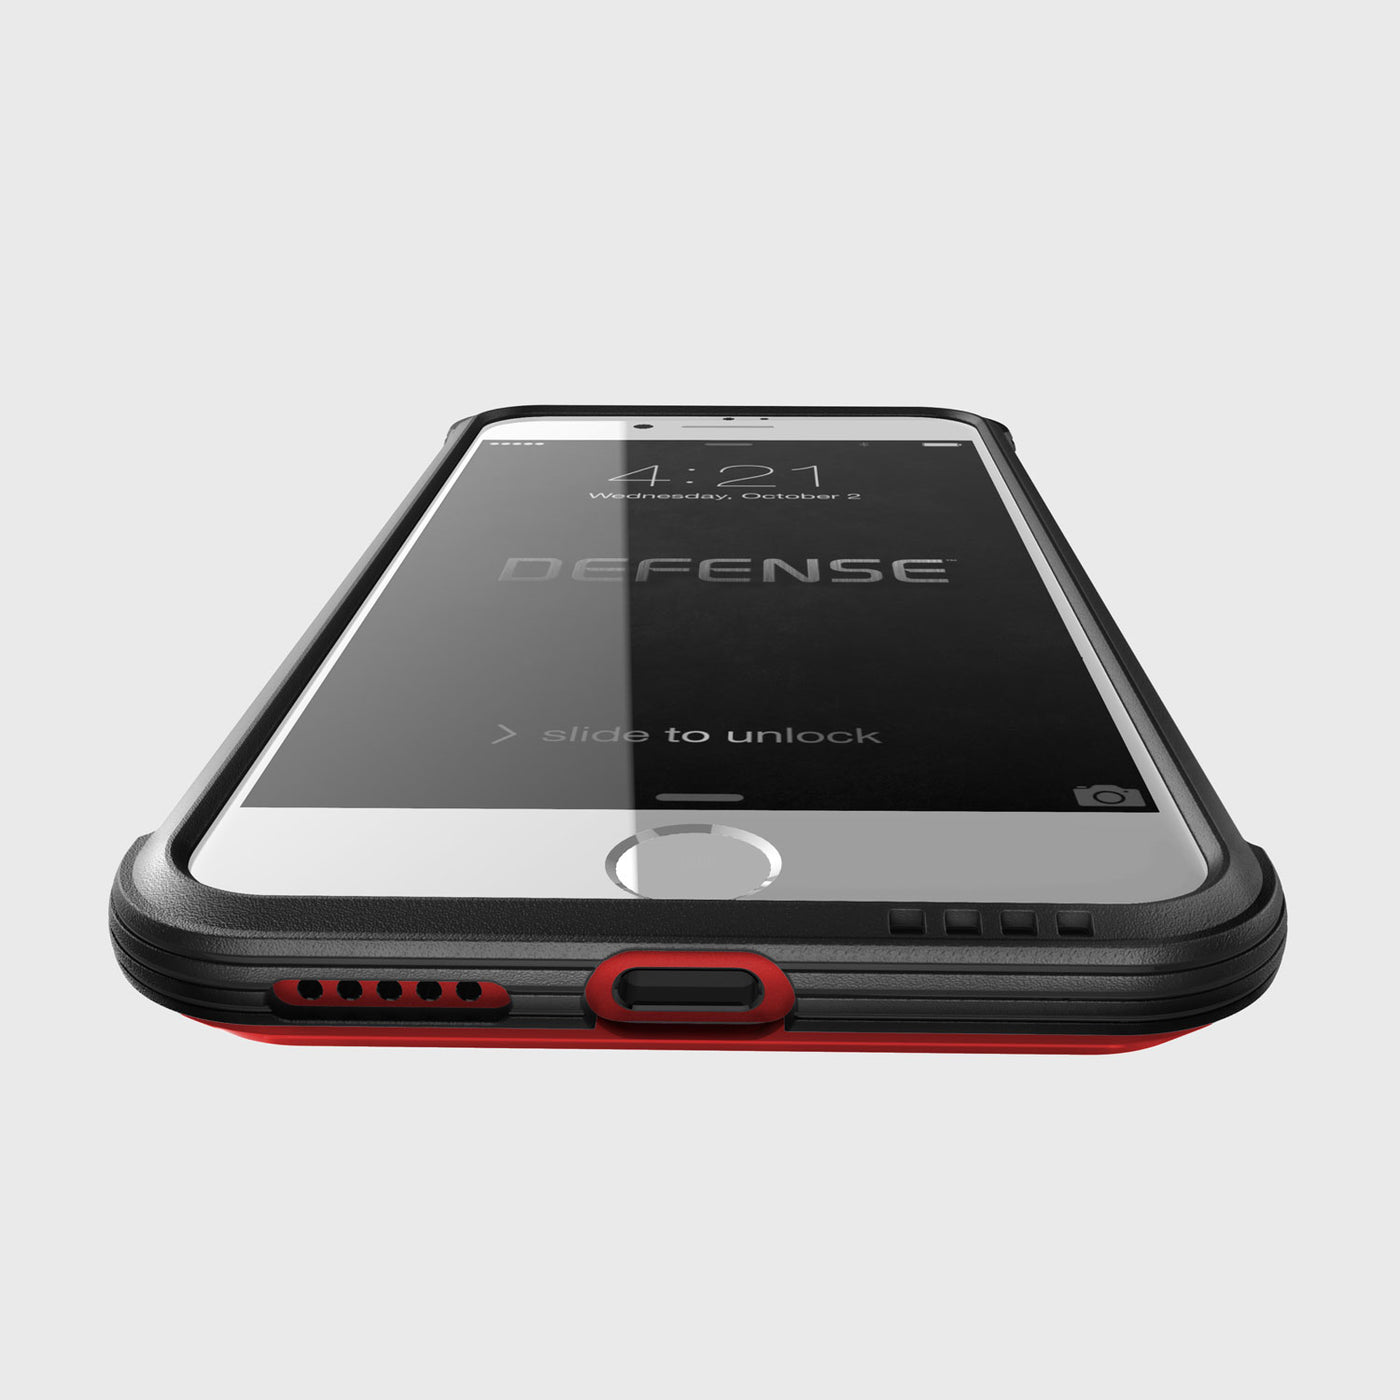 Rugged Case for iPhone 8 Plus. Raptic Shield in red.